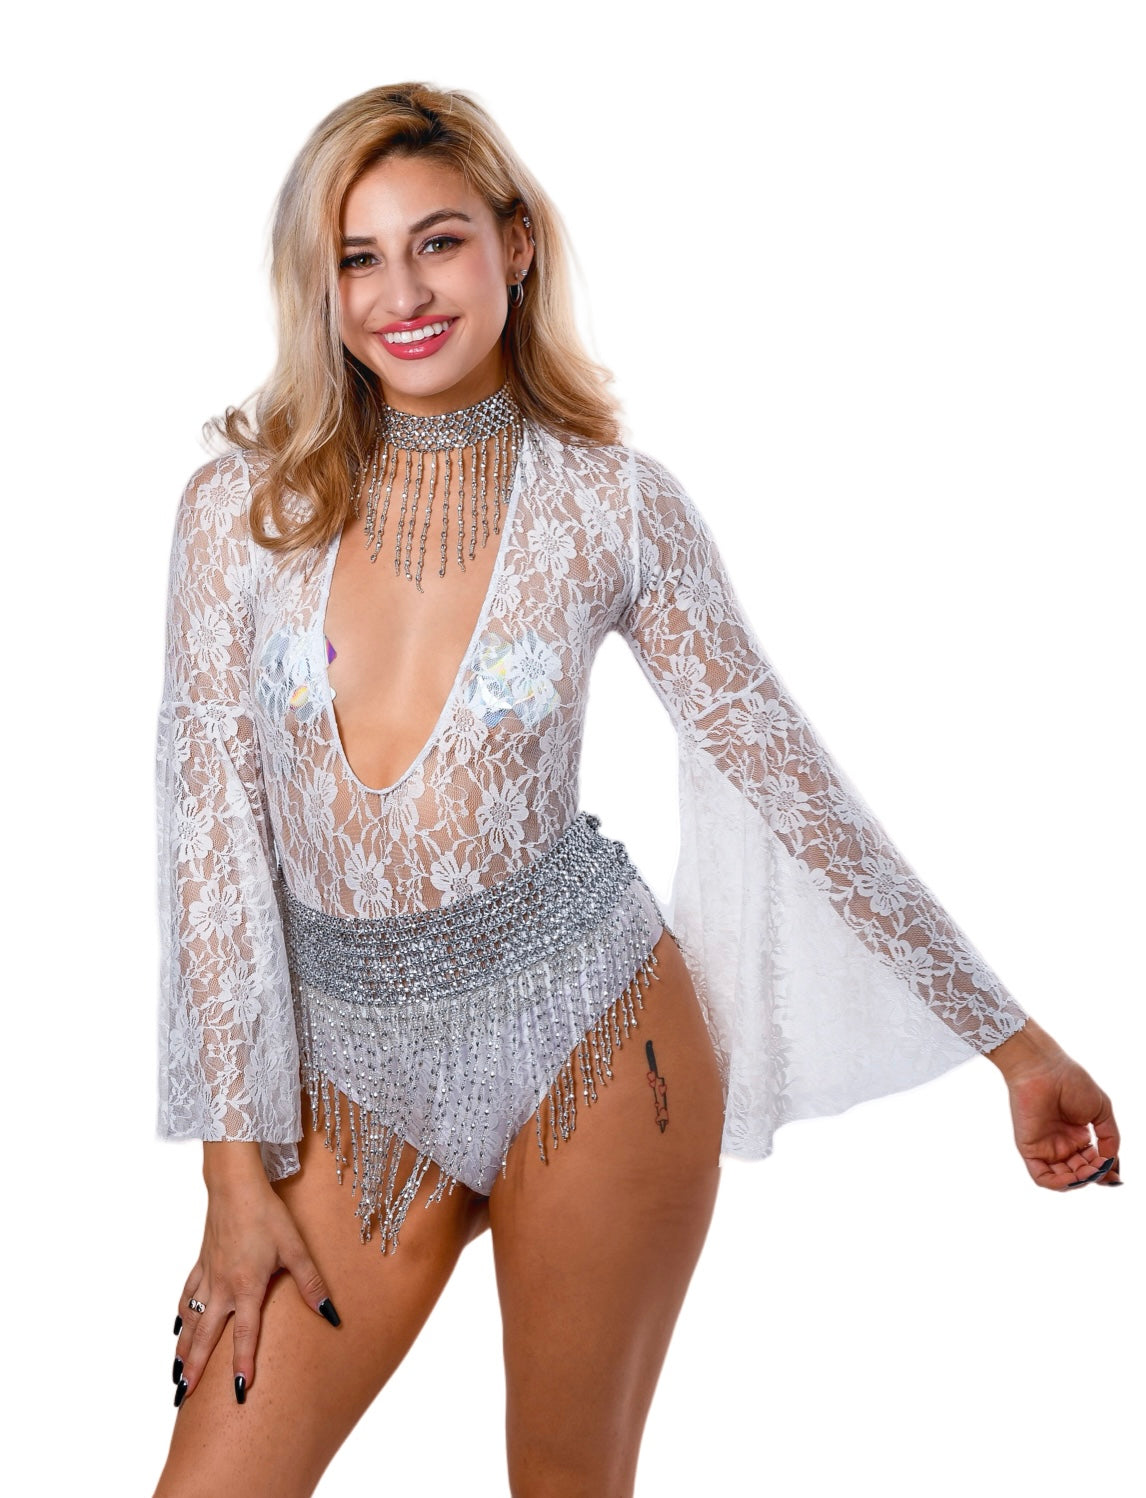 Bell Sleeve Bodysuit- White Lace Rave clothes,rave outfits,edc